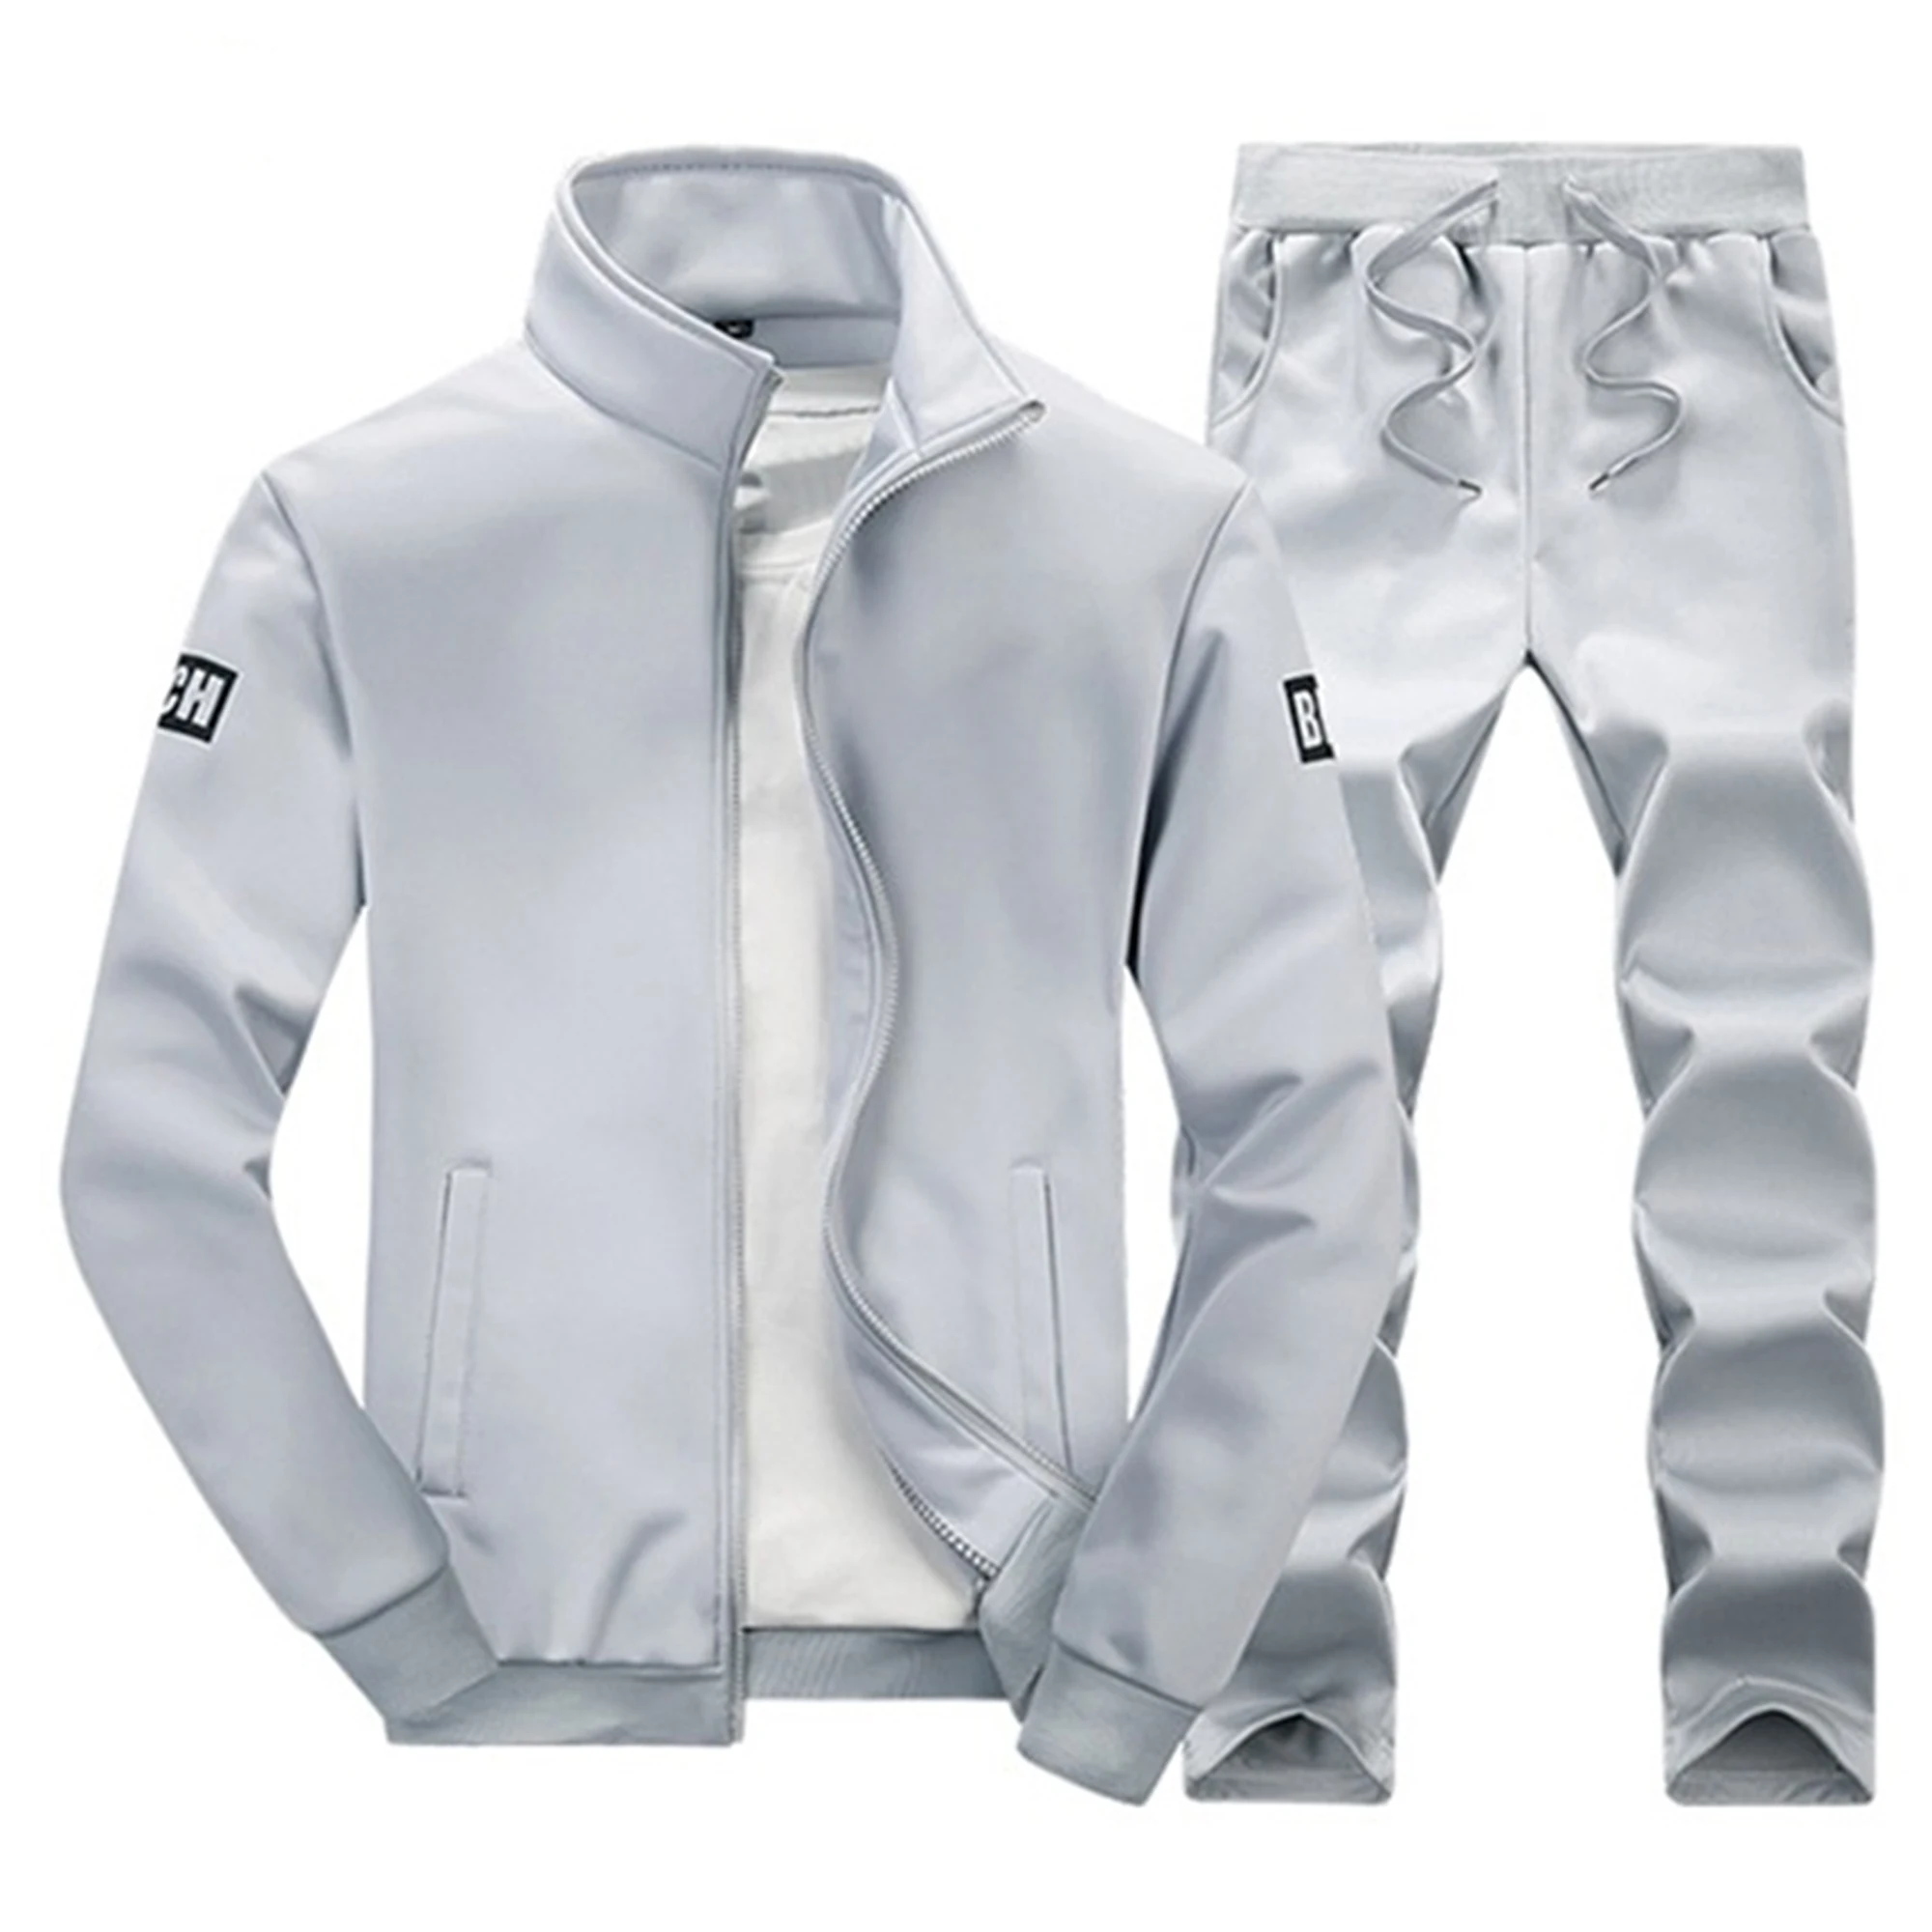 

summer customize design slim stylish youth plain polyester valvet traning track jacket blank joggers suits tracksuits for mens, Black,white,blue or custom color